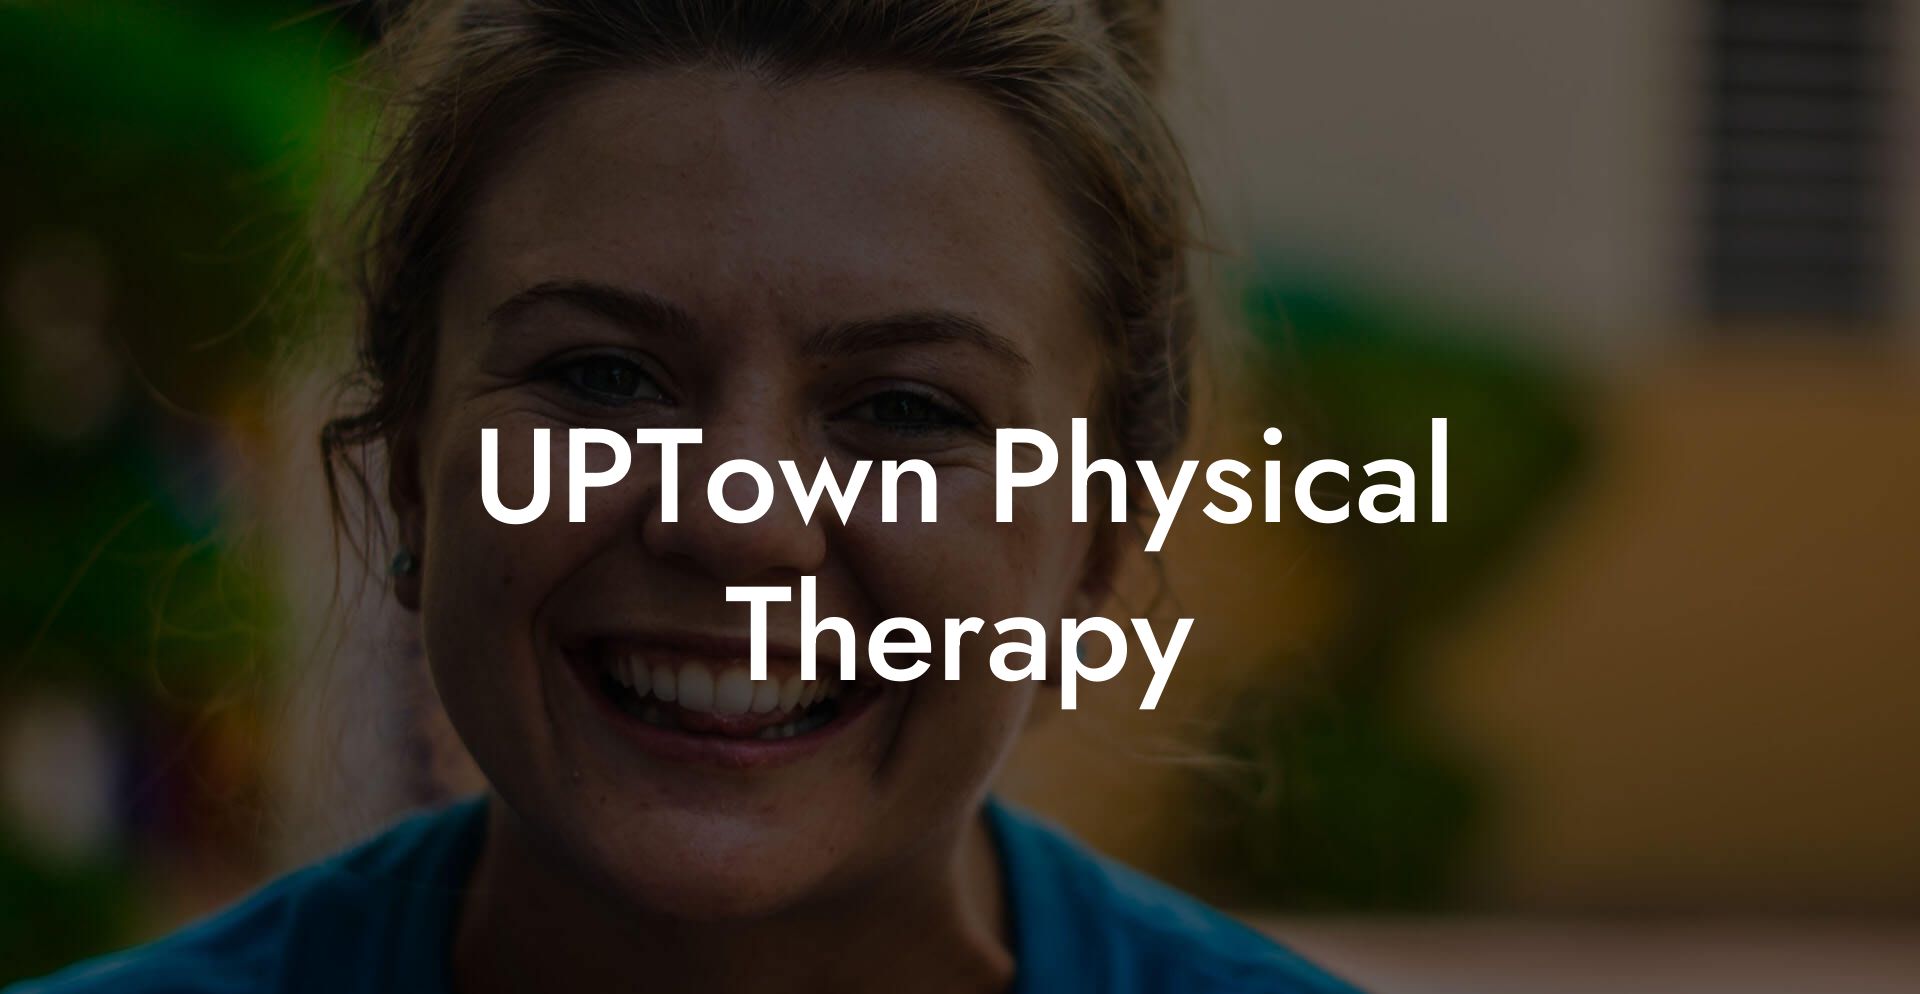 UPTown Physical Therapy